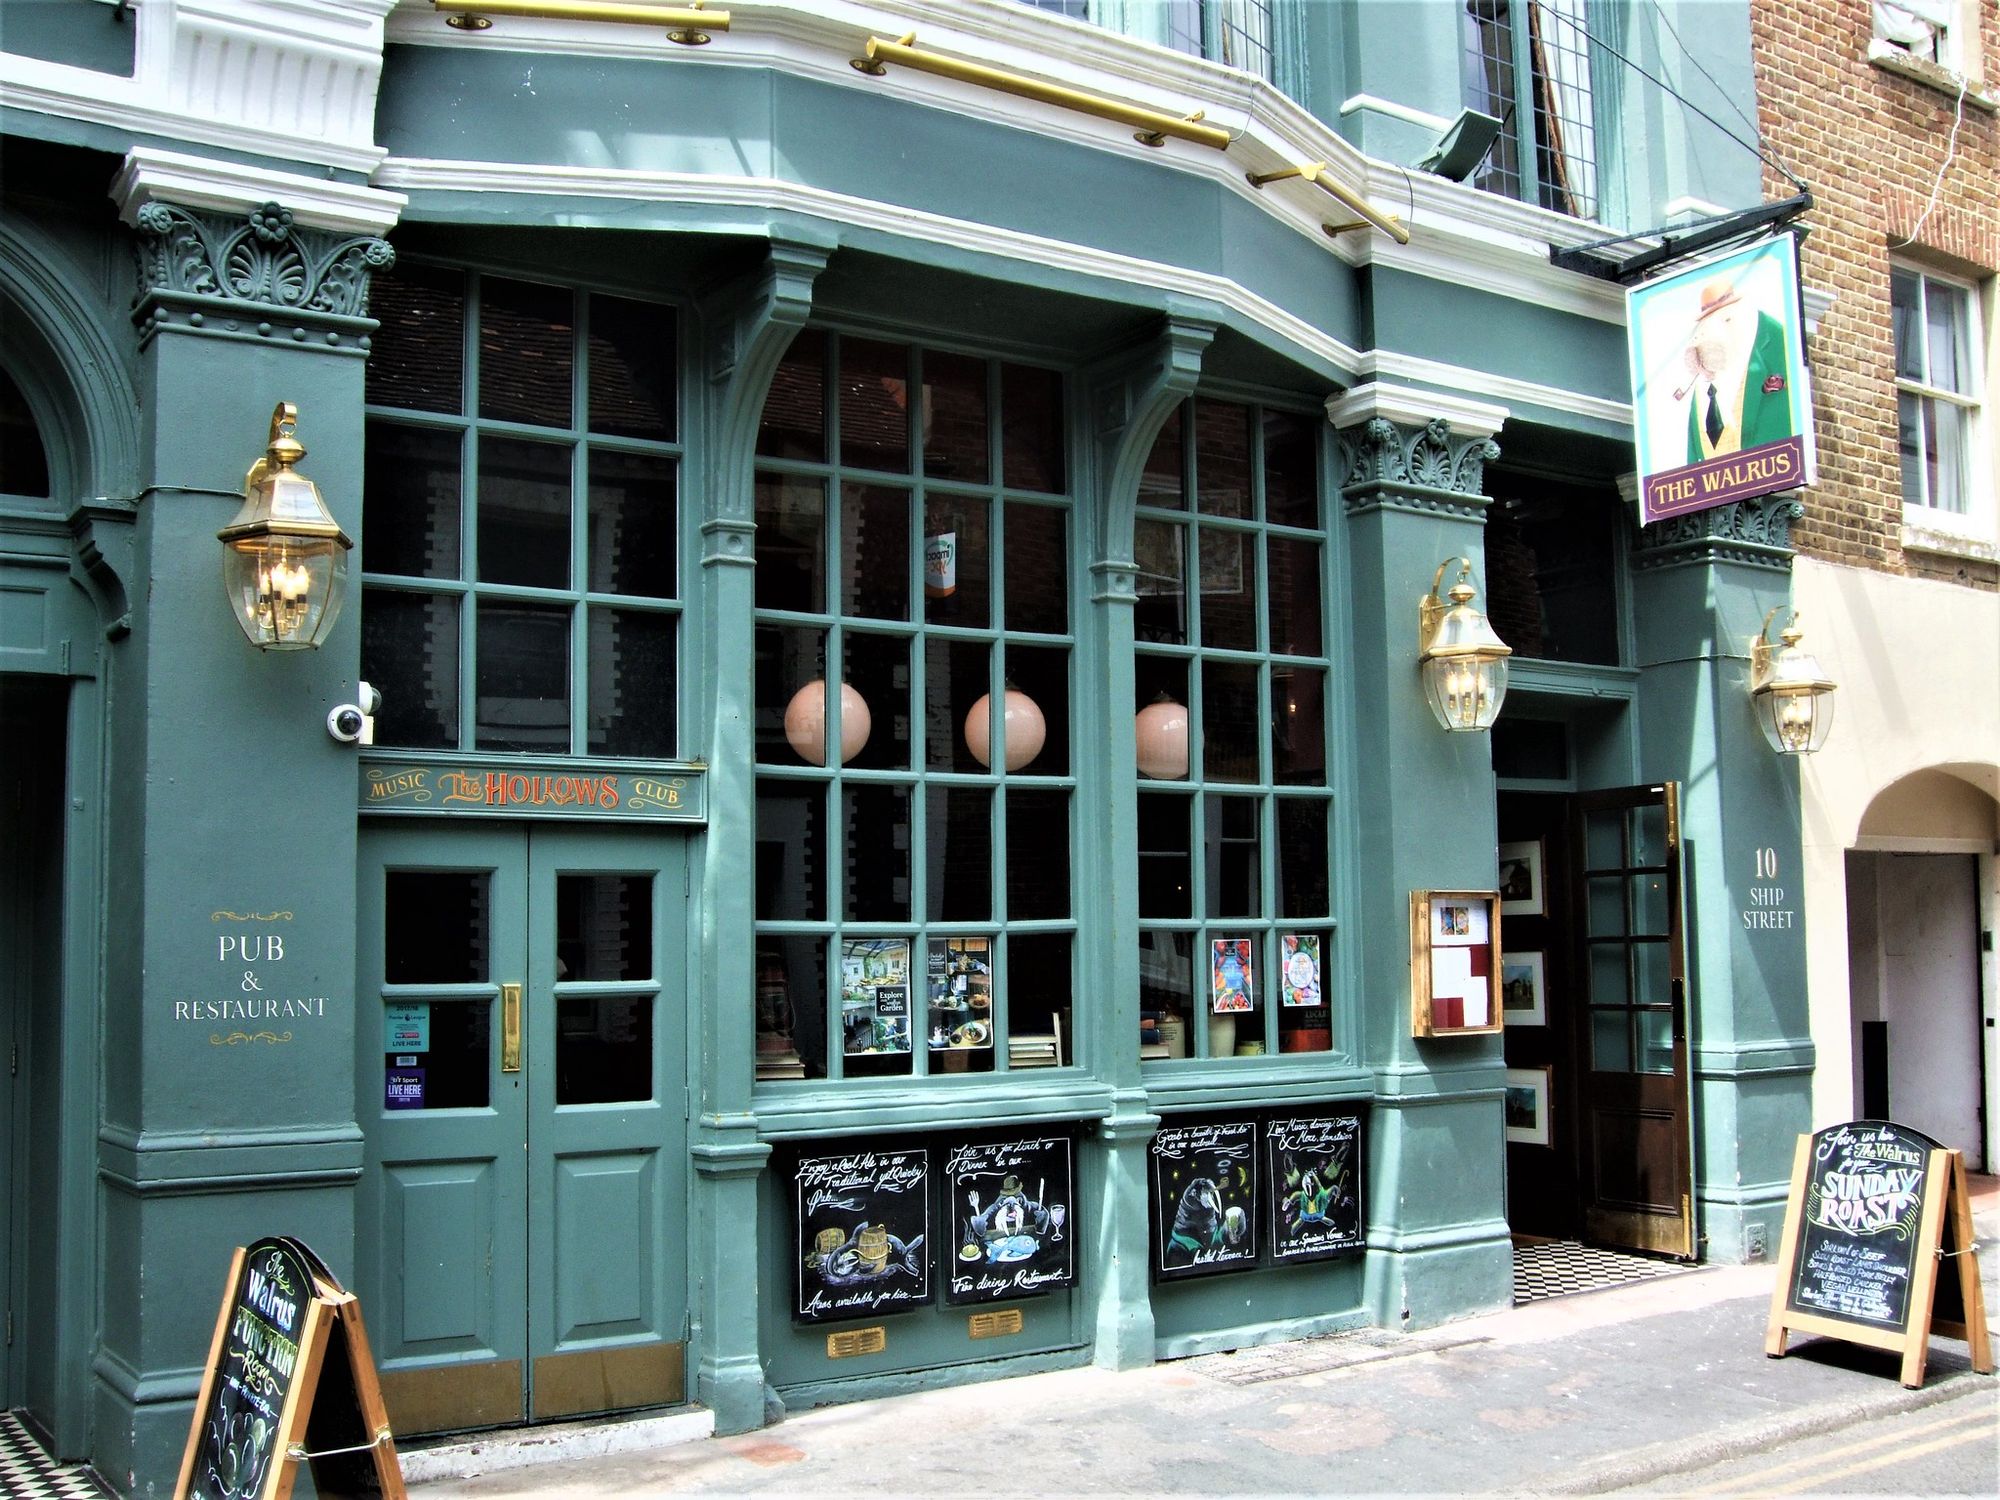 A picture of The Walrus pub